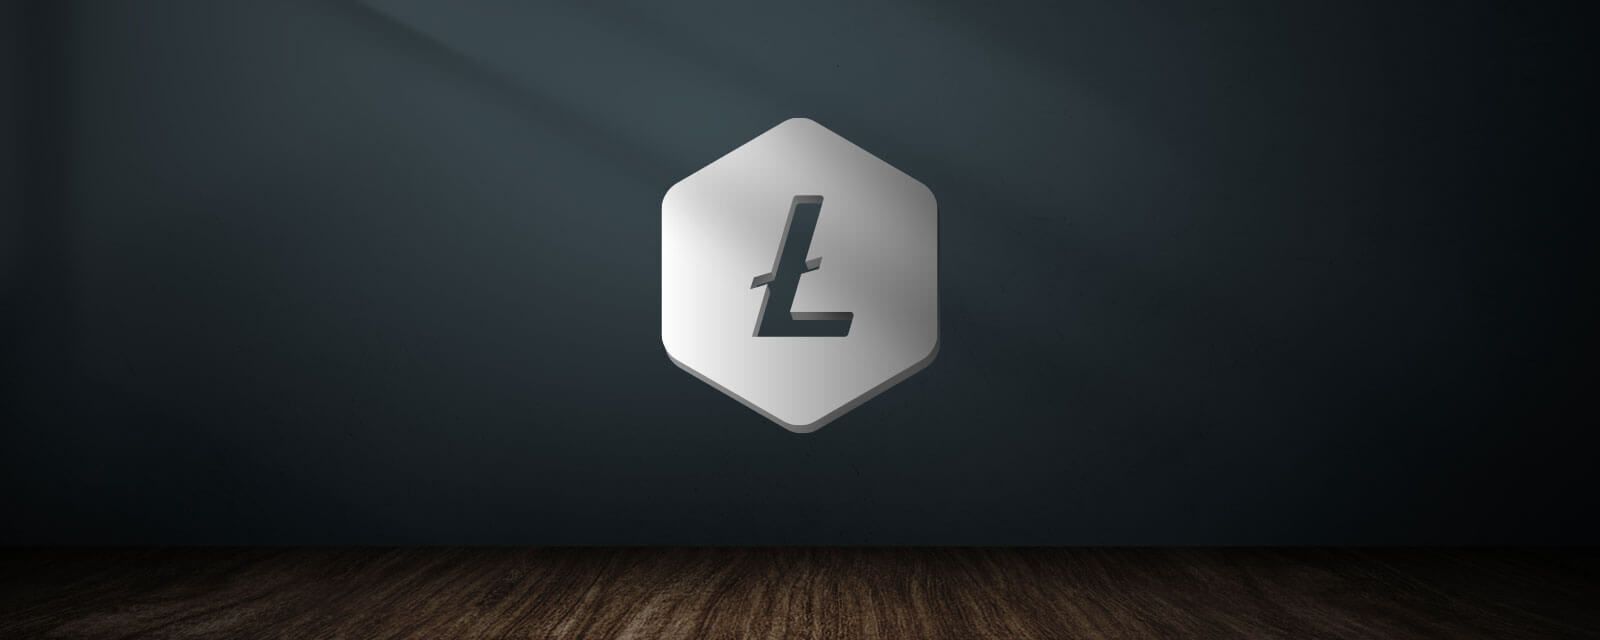 What is Litecoin?